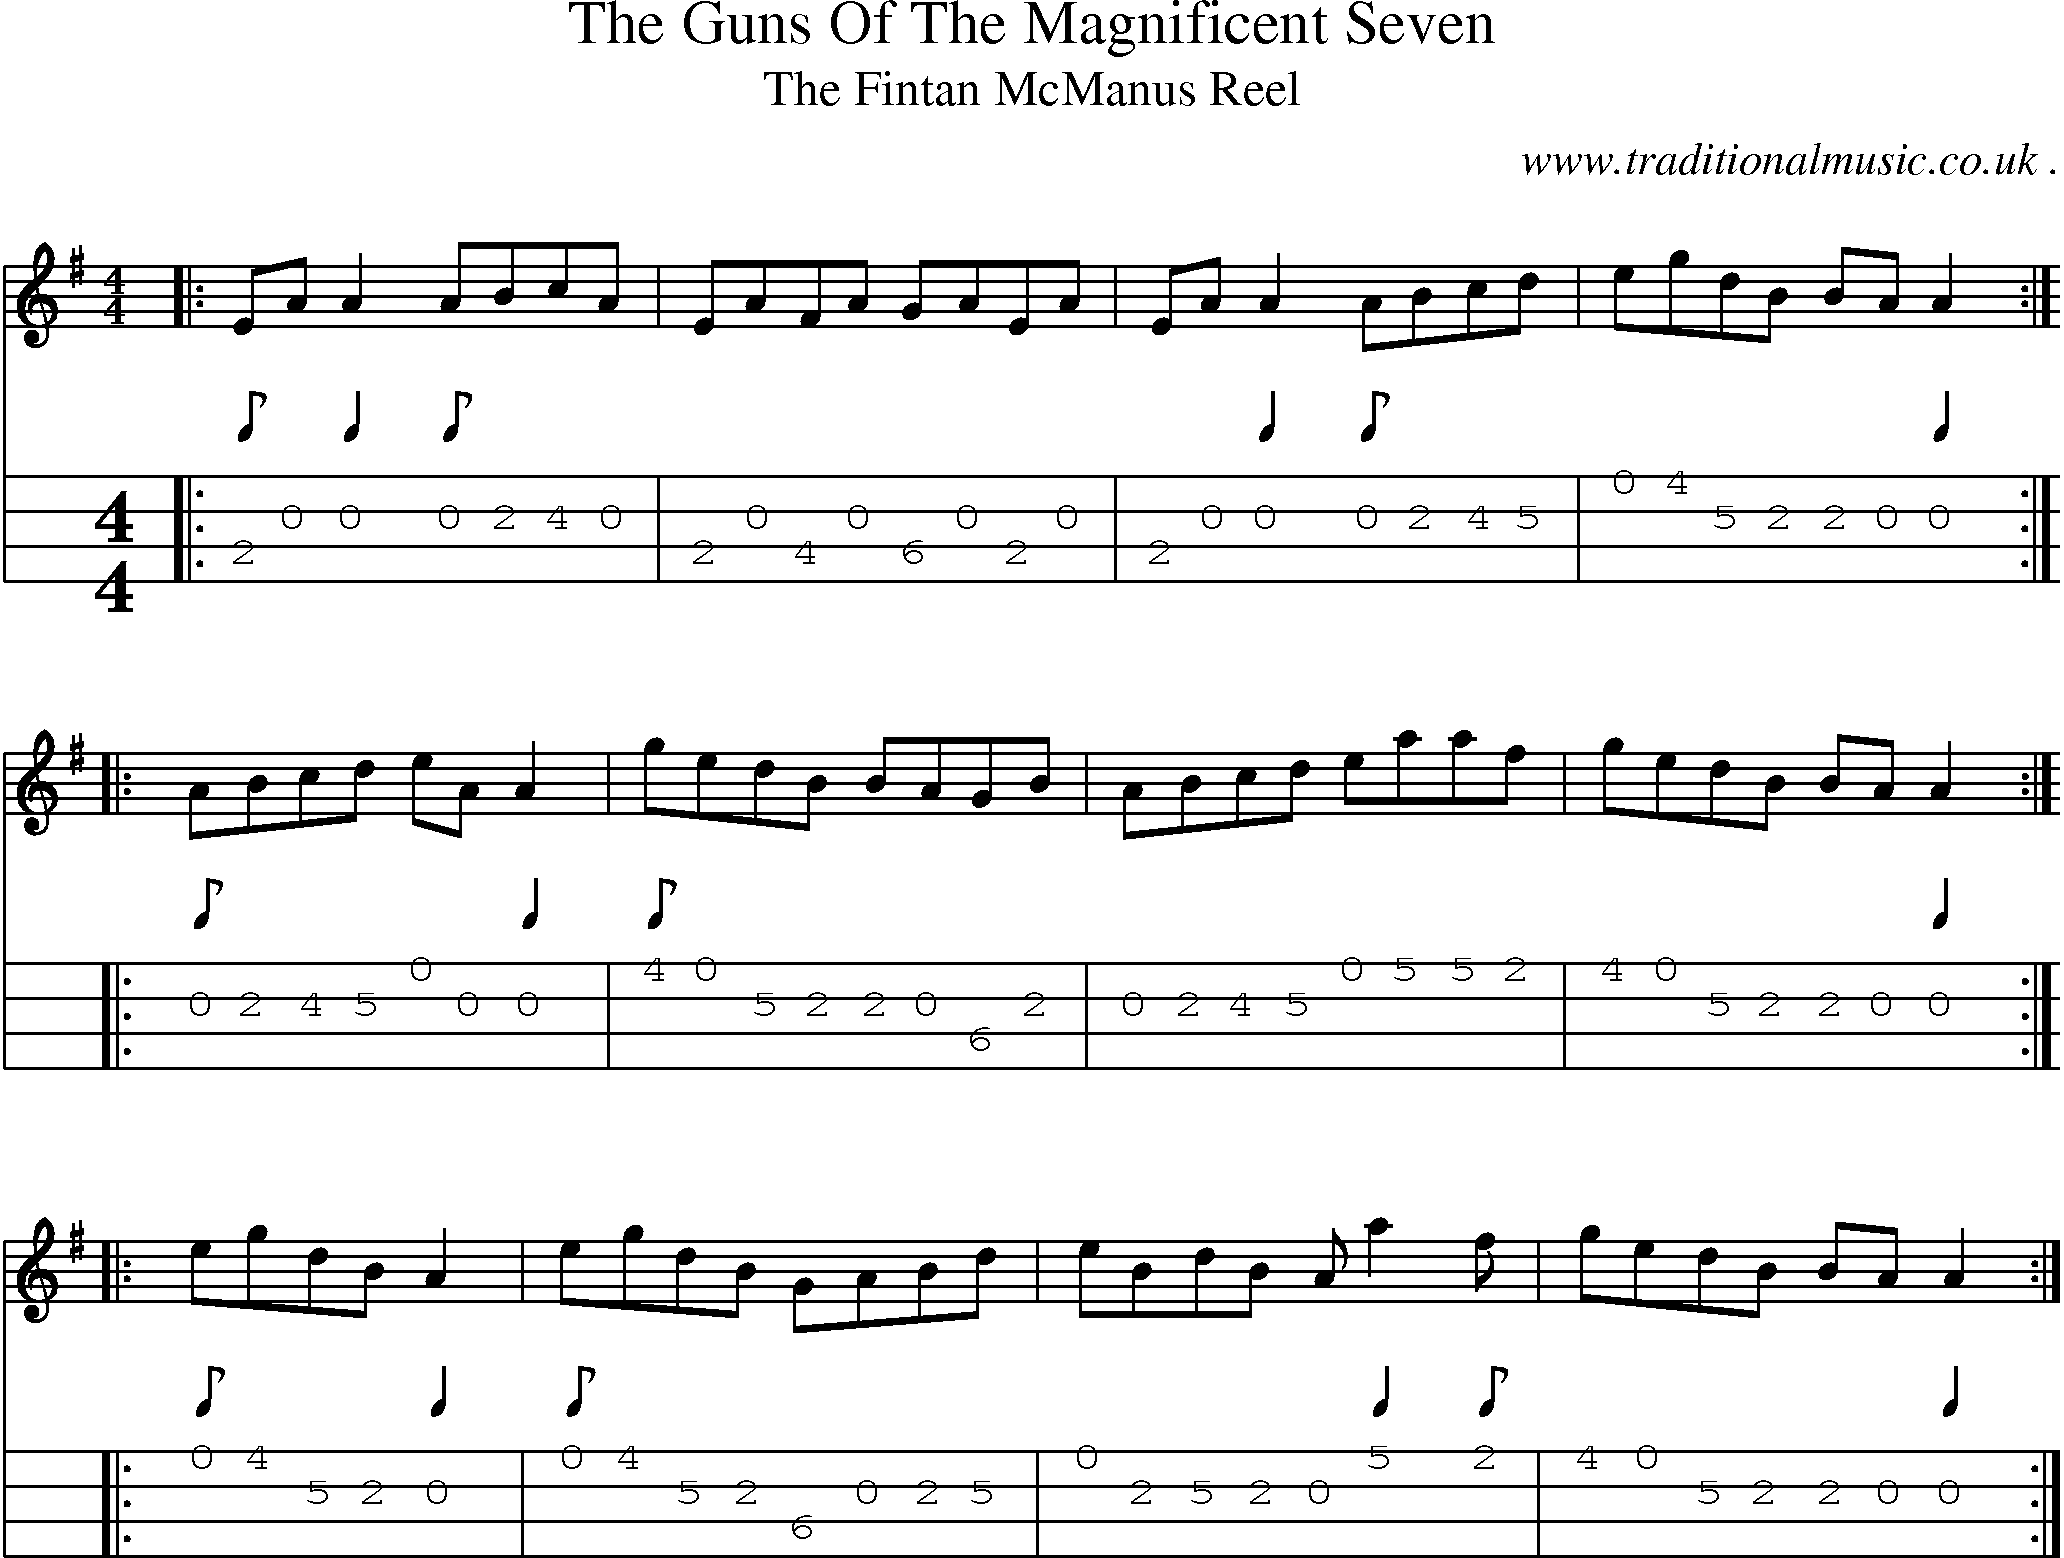 Sheet-Music and Mandolin Tabs for The Guns Of The Magnificent Seven